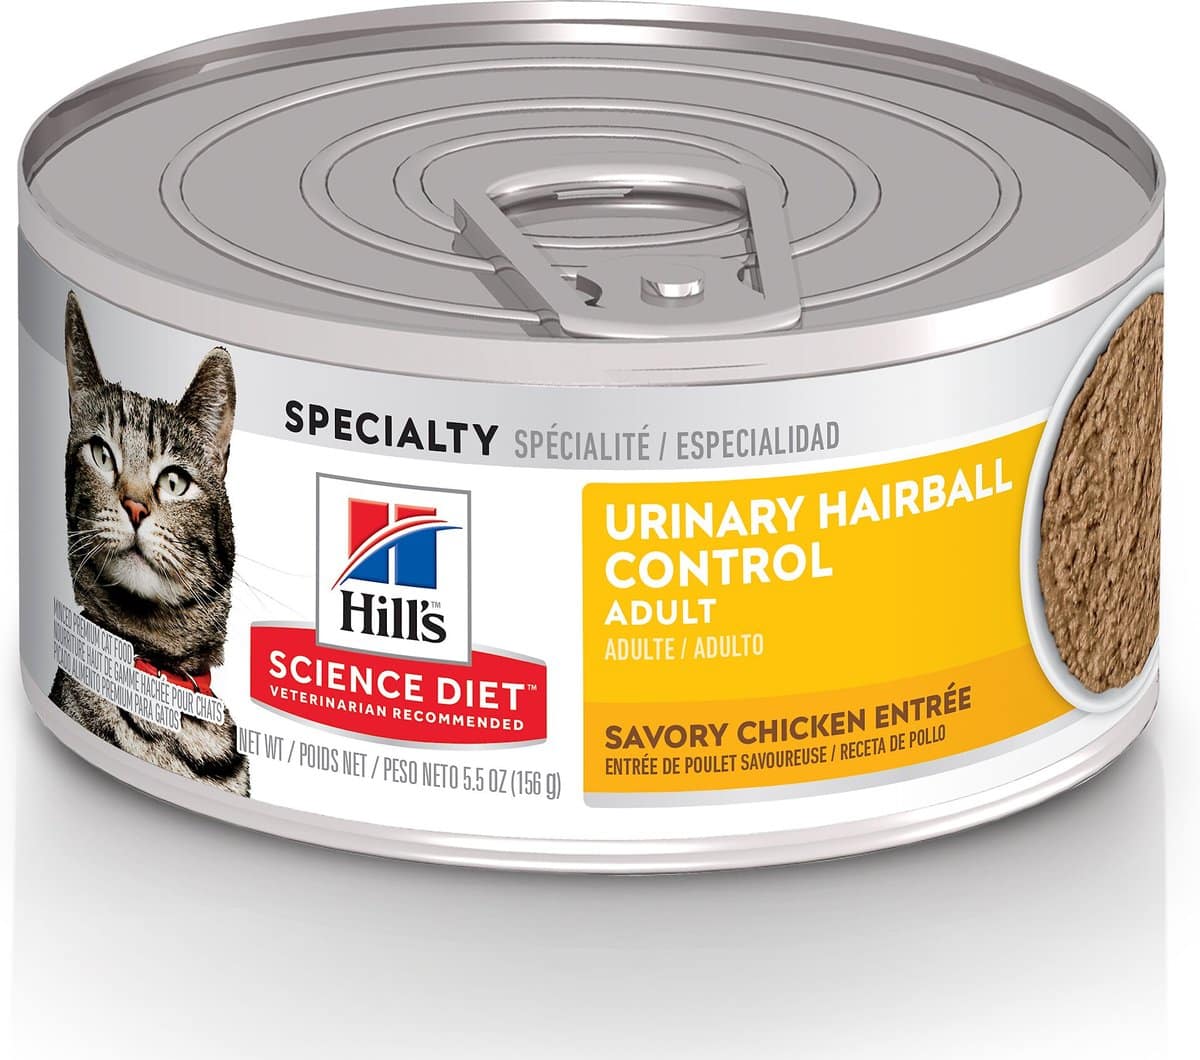 Hill's Science Diet Adult Urinary Hairball Control Savory Chicken Entree, Canned Cat Food